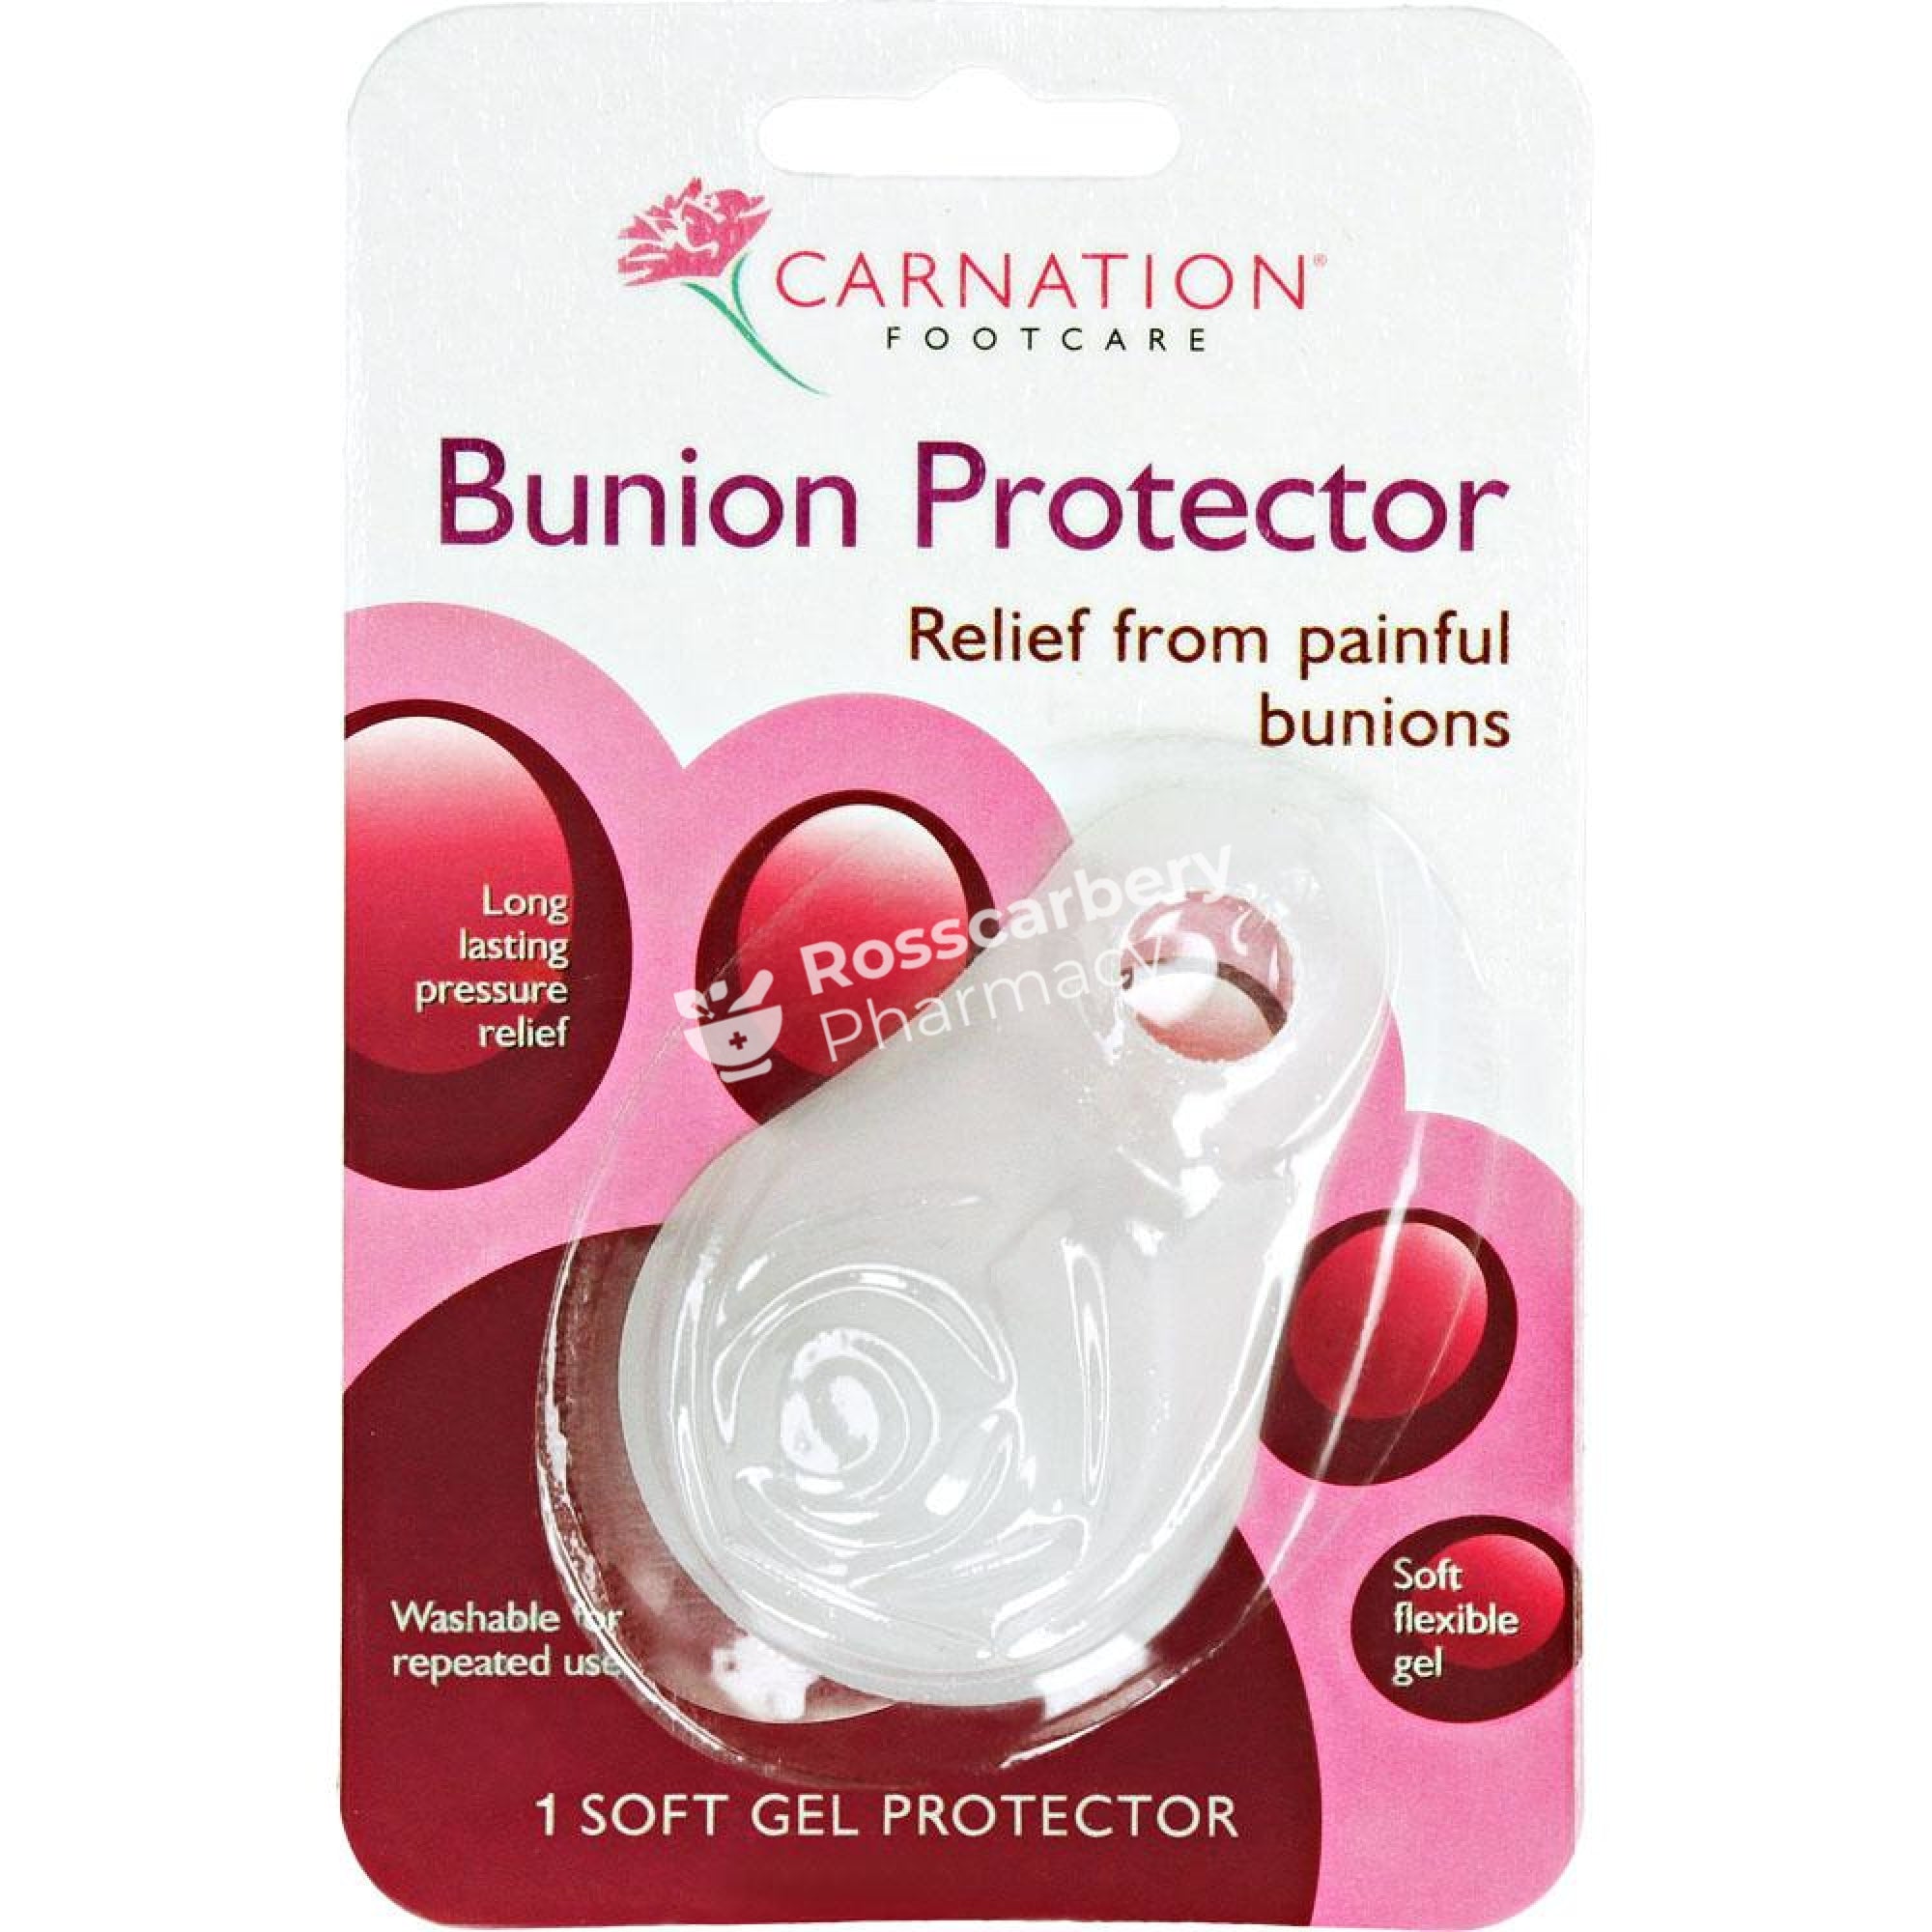 Carnation Footcare Soft Gel Bunion Protector Blister & Care